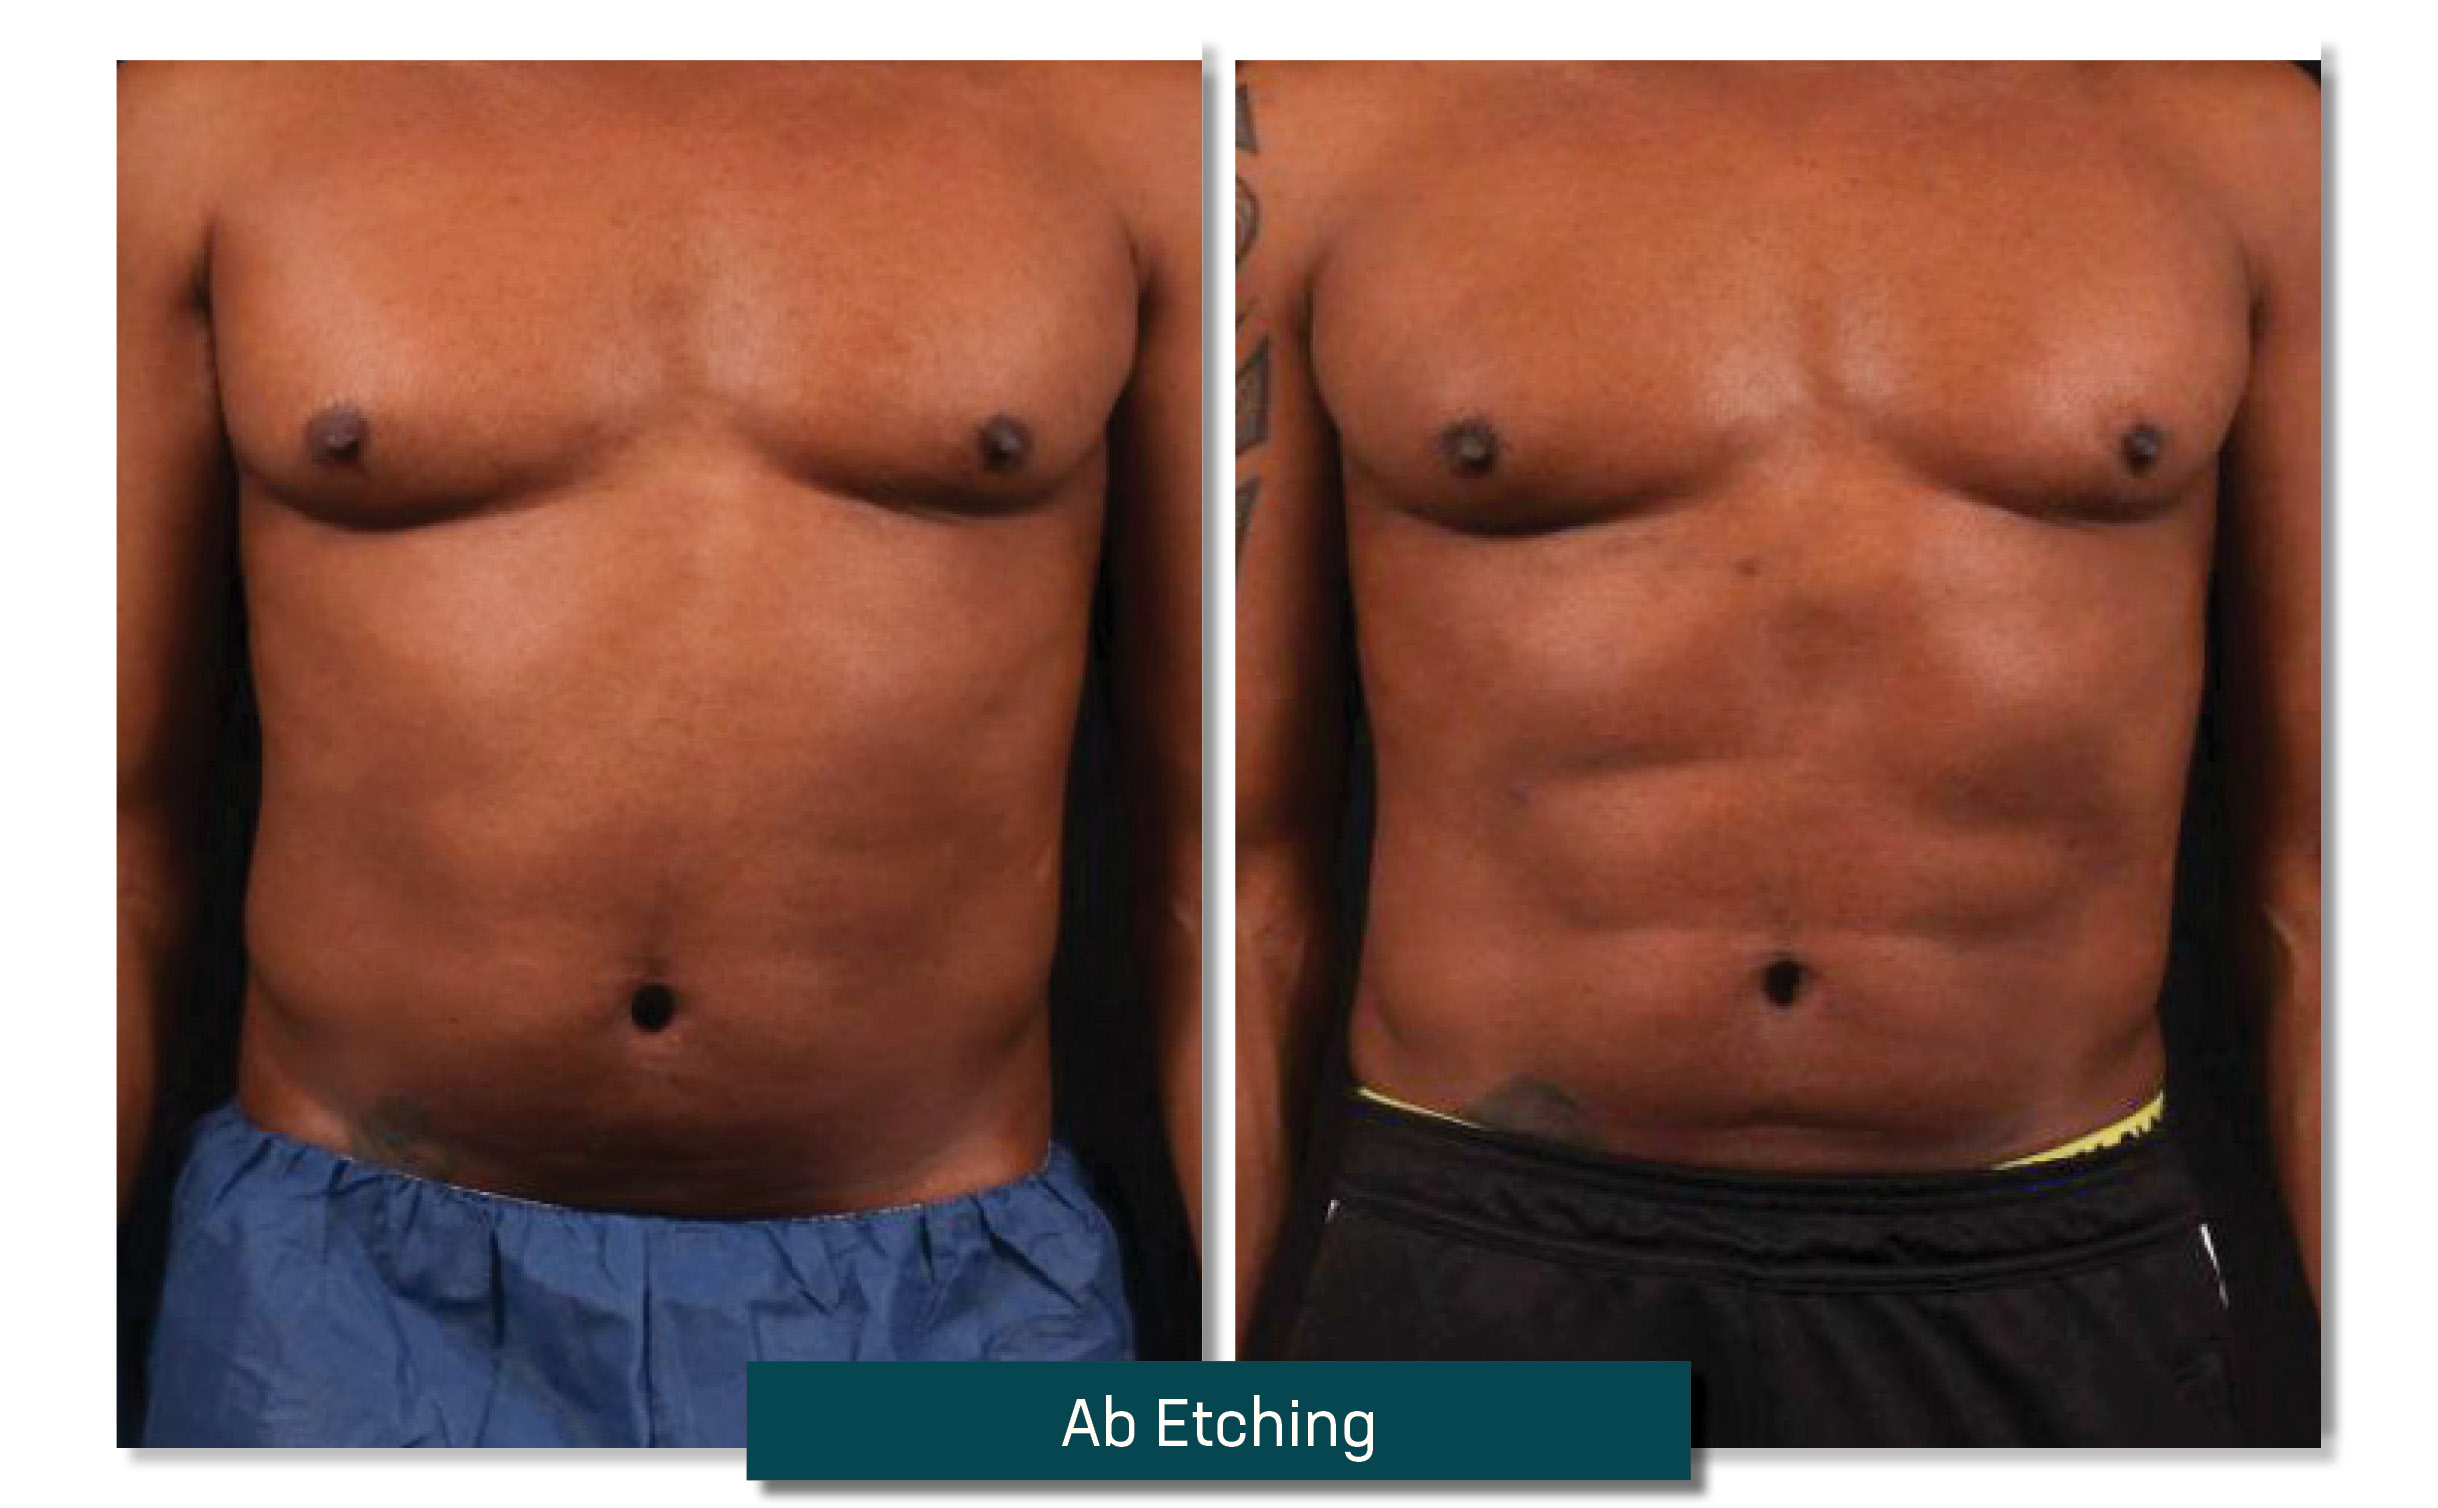 ab etching - before and after